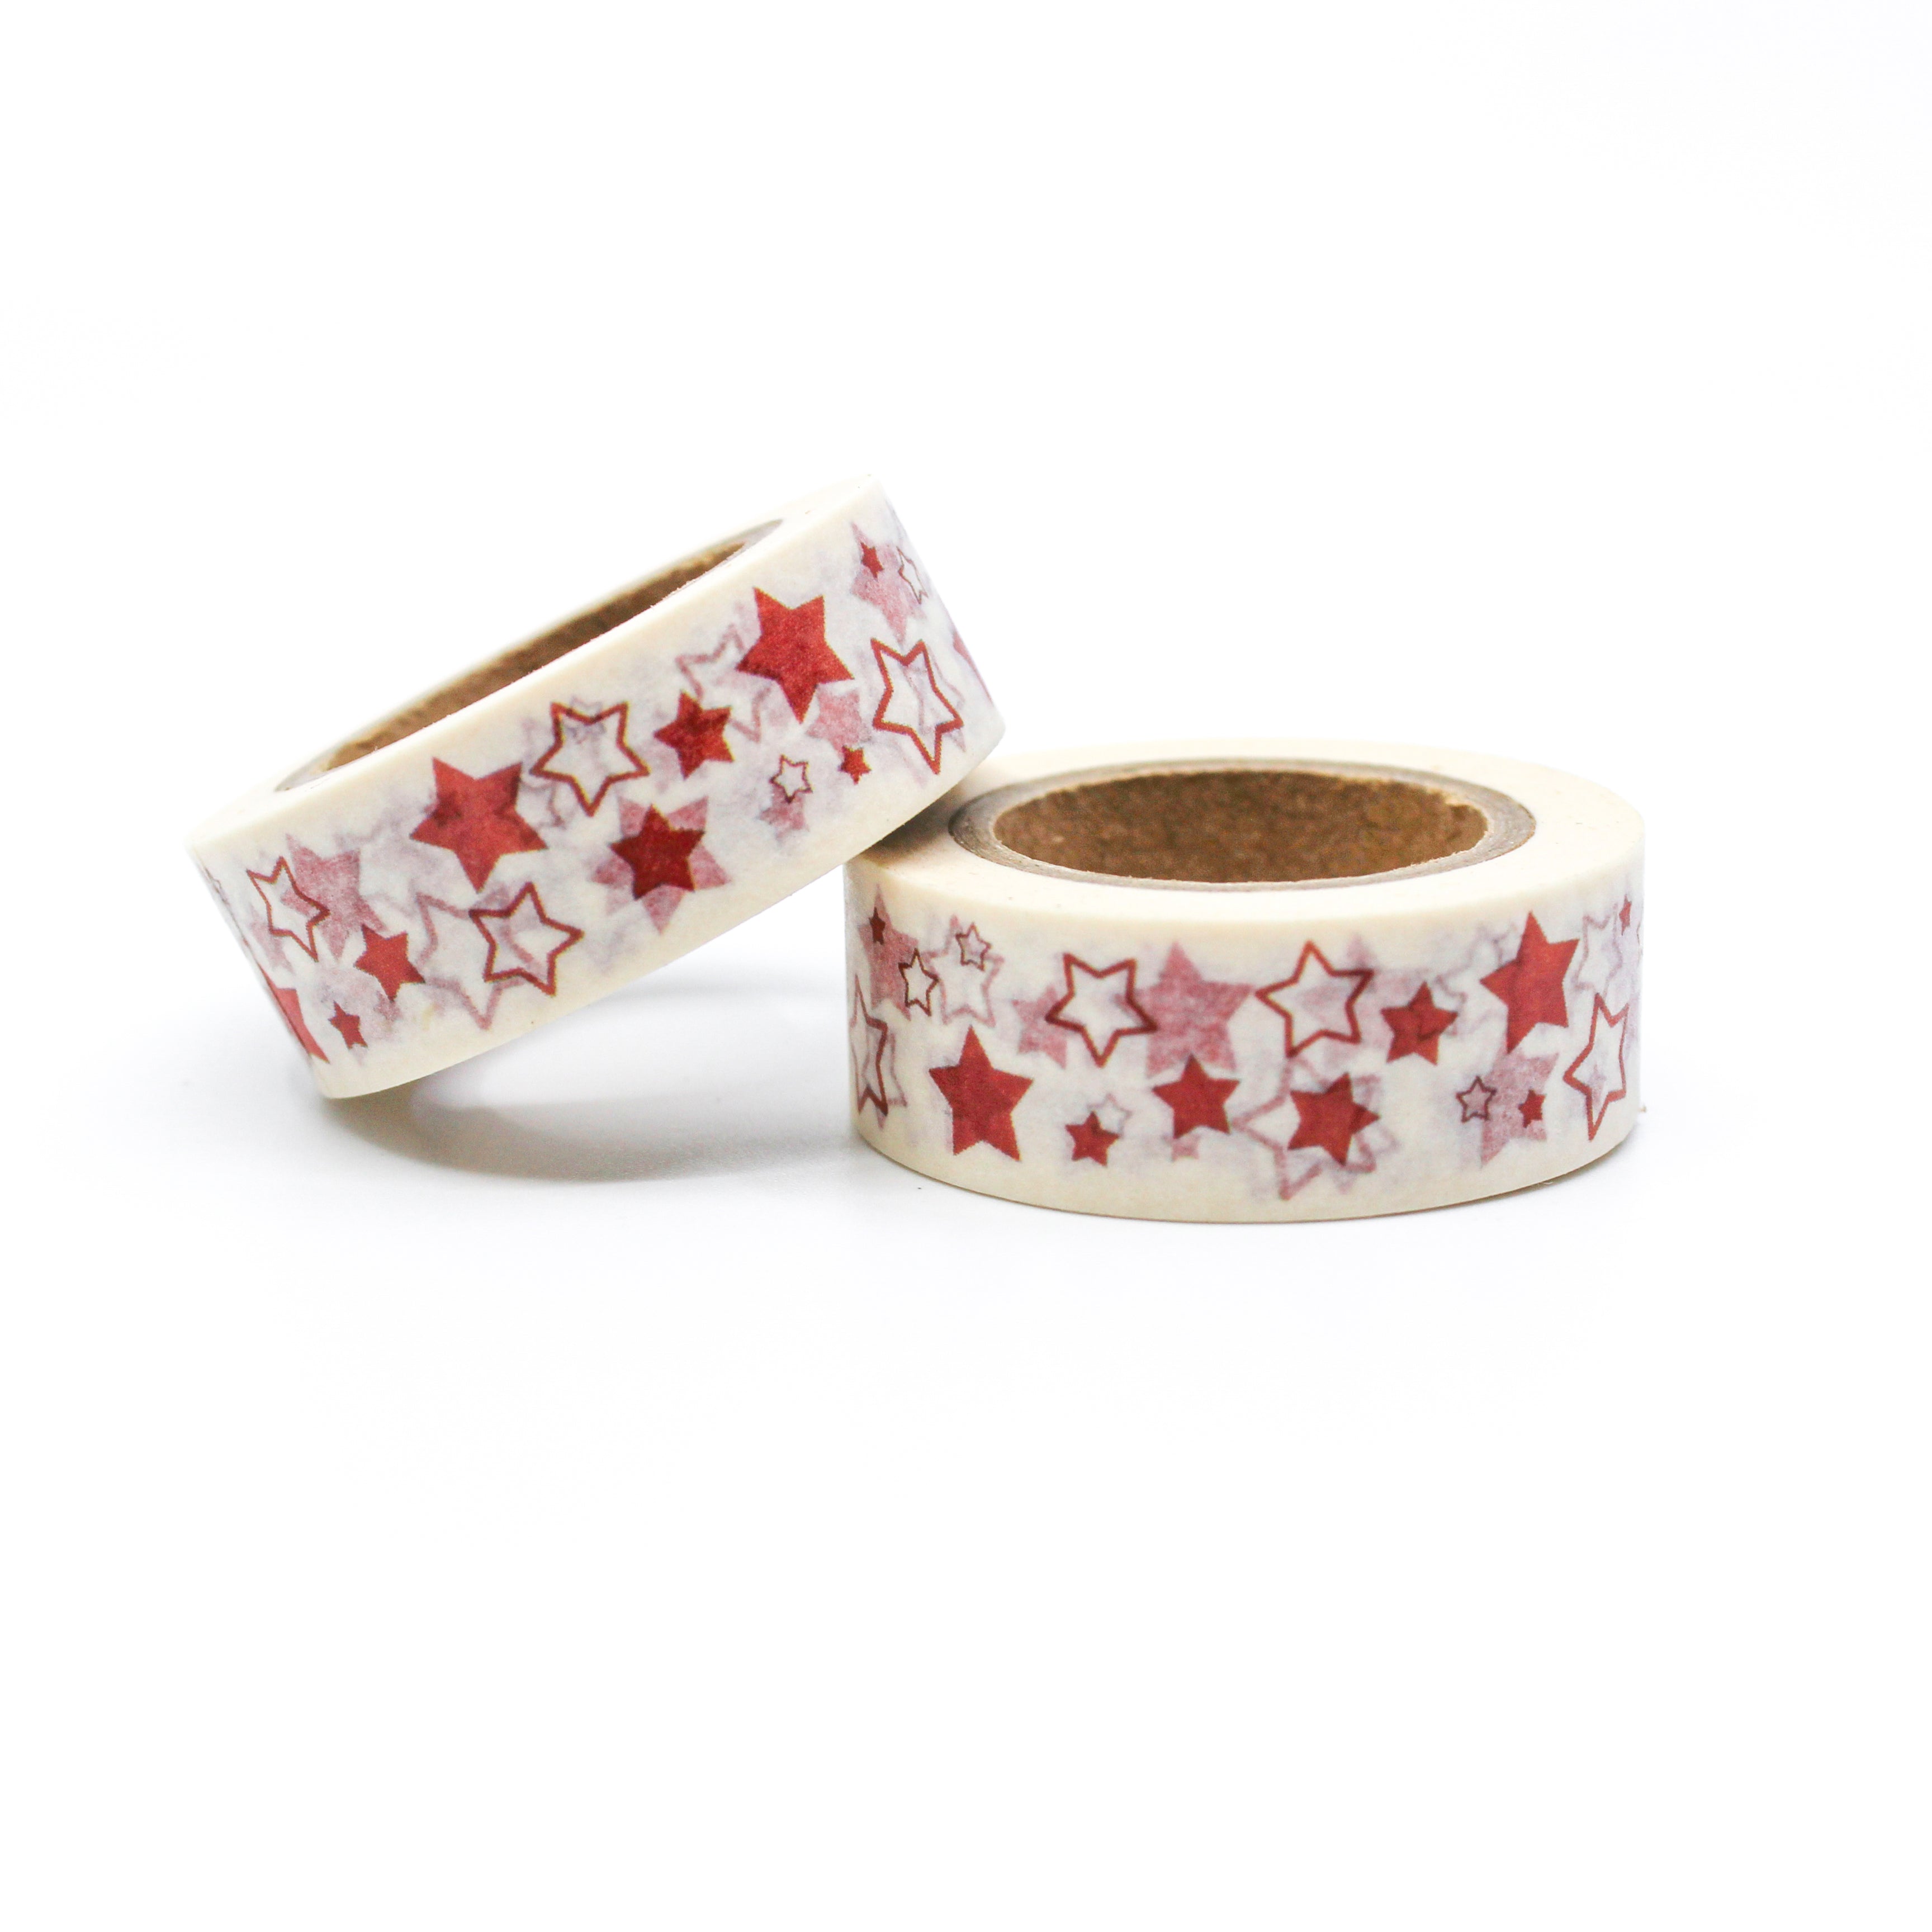 This is a cute red and white mini-stars pattern for Journal Supplies, Scrapbooking washi tapes from BBB Supplies Craft Shop